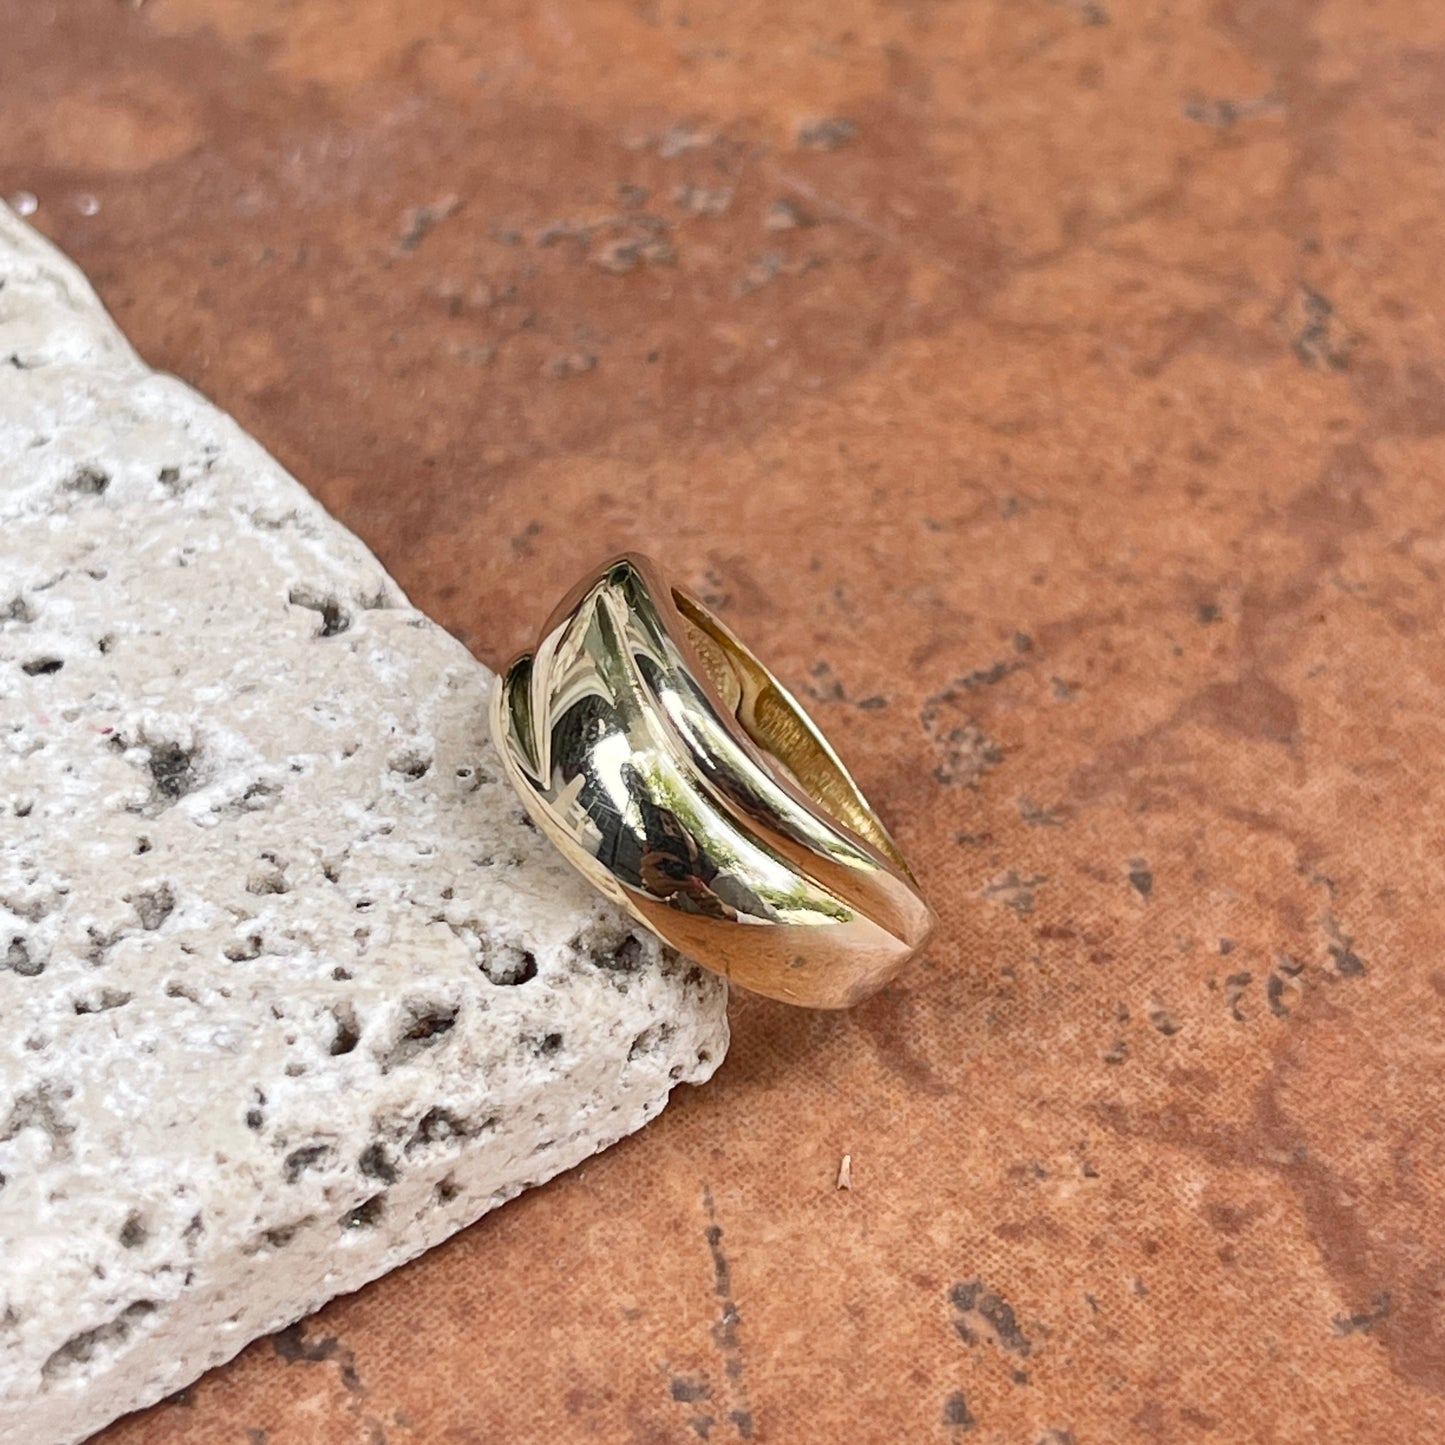 10KT Yellow Gold Artistic Grooved Cigar Band Ring